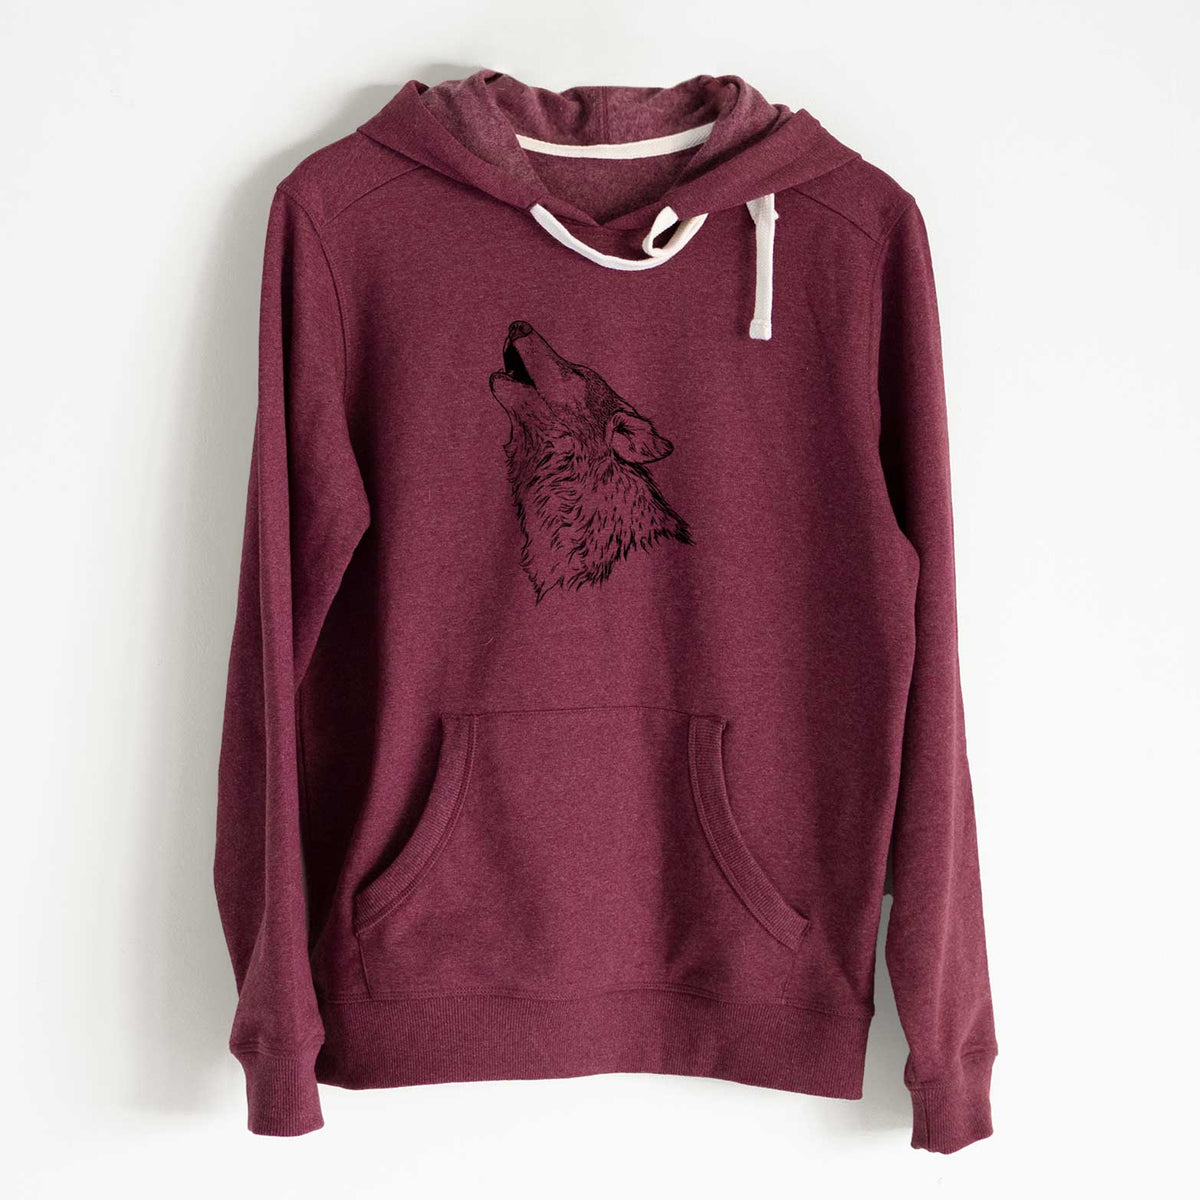 Canis lupus - Grey Wolf Howling - Unisex Recycled Hoodie - CLOSEOUT - FINAL SALE